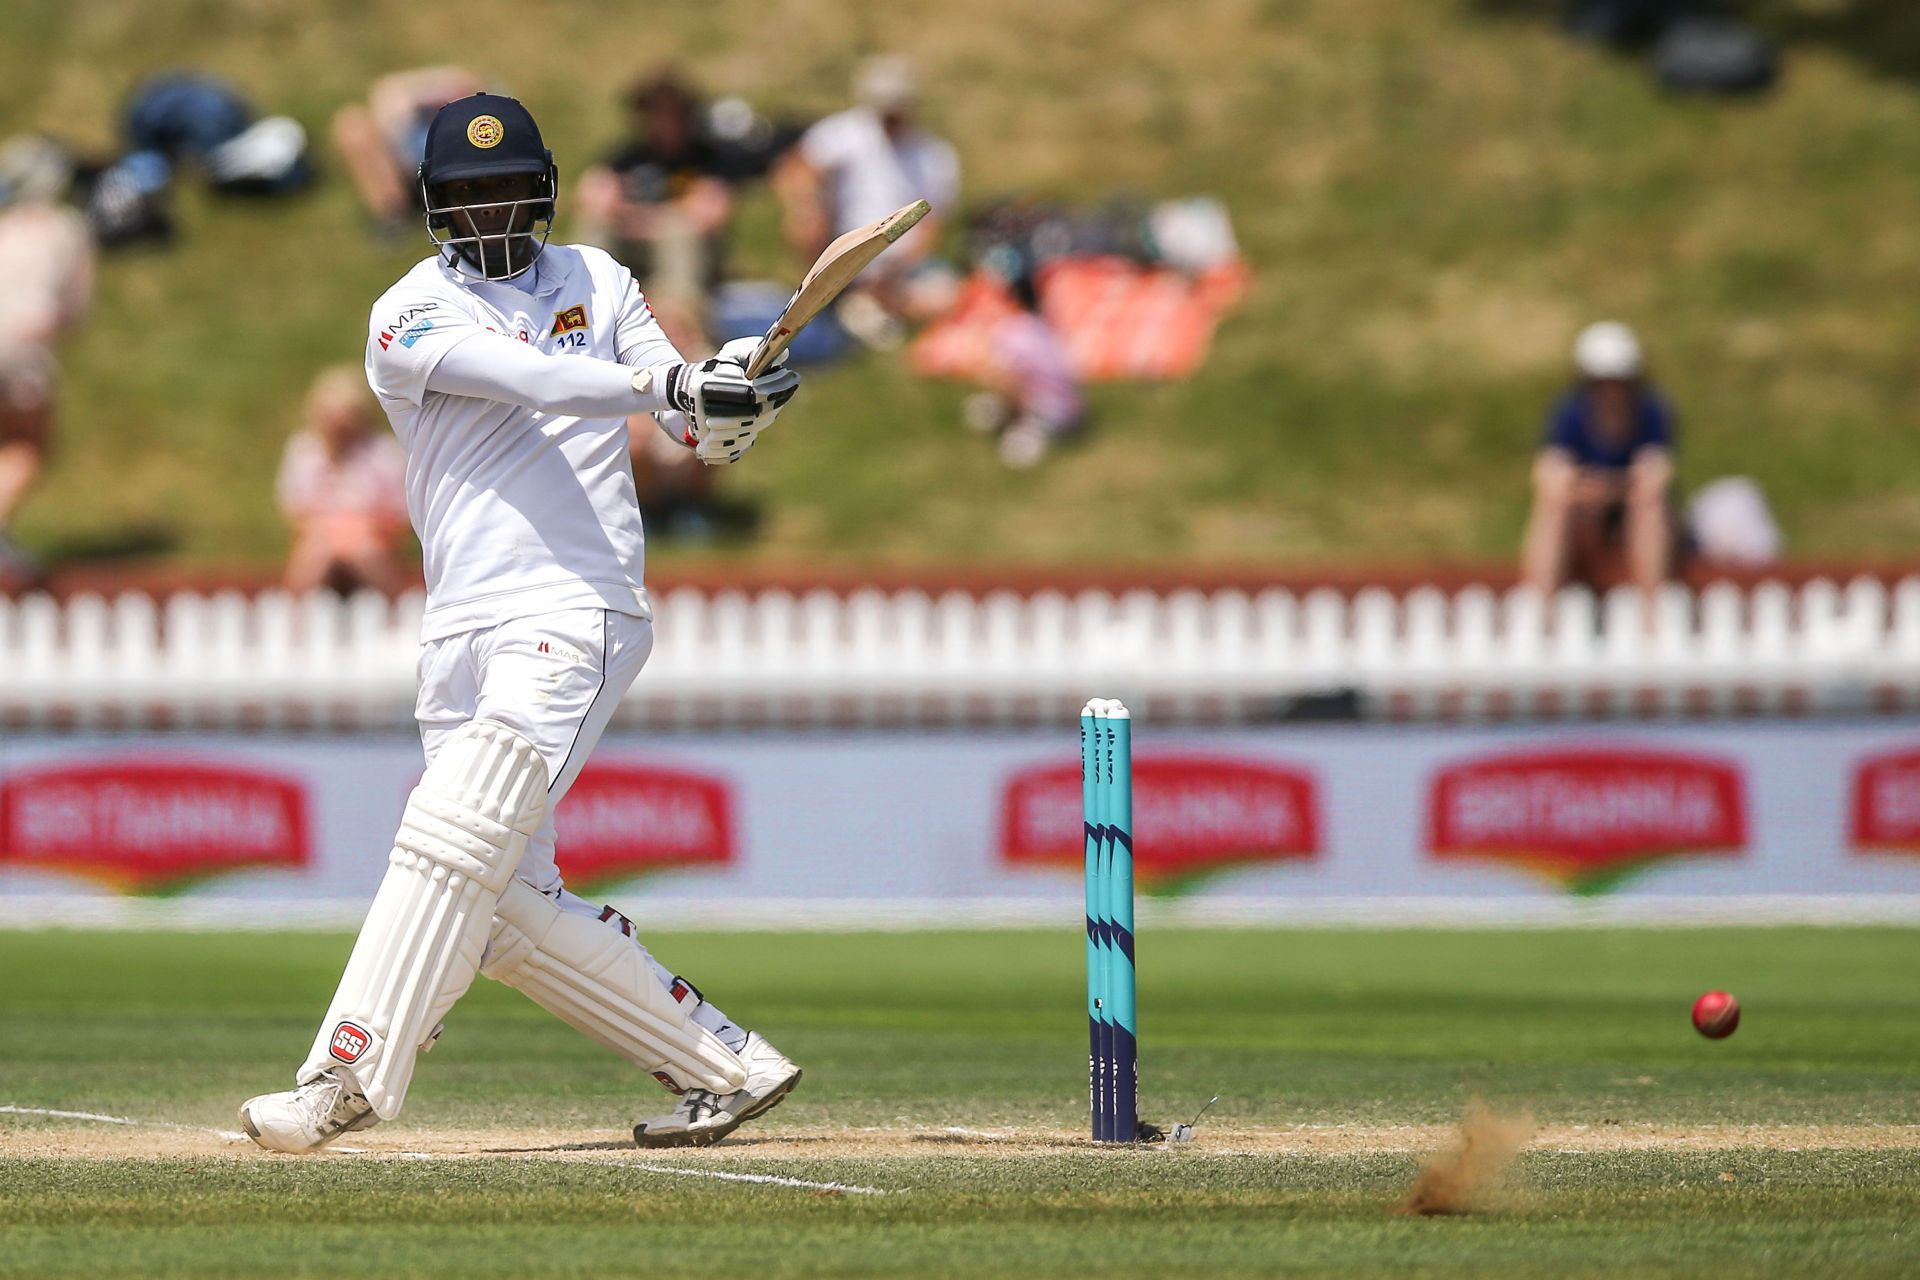 Angelo Mathews will be playing his 100th Test when he faces Pakistan in the Test beginning on Sunday